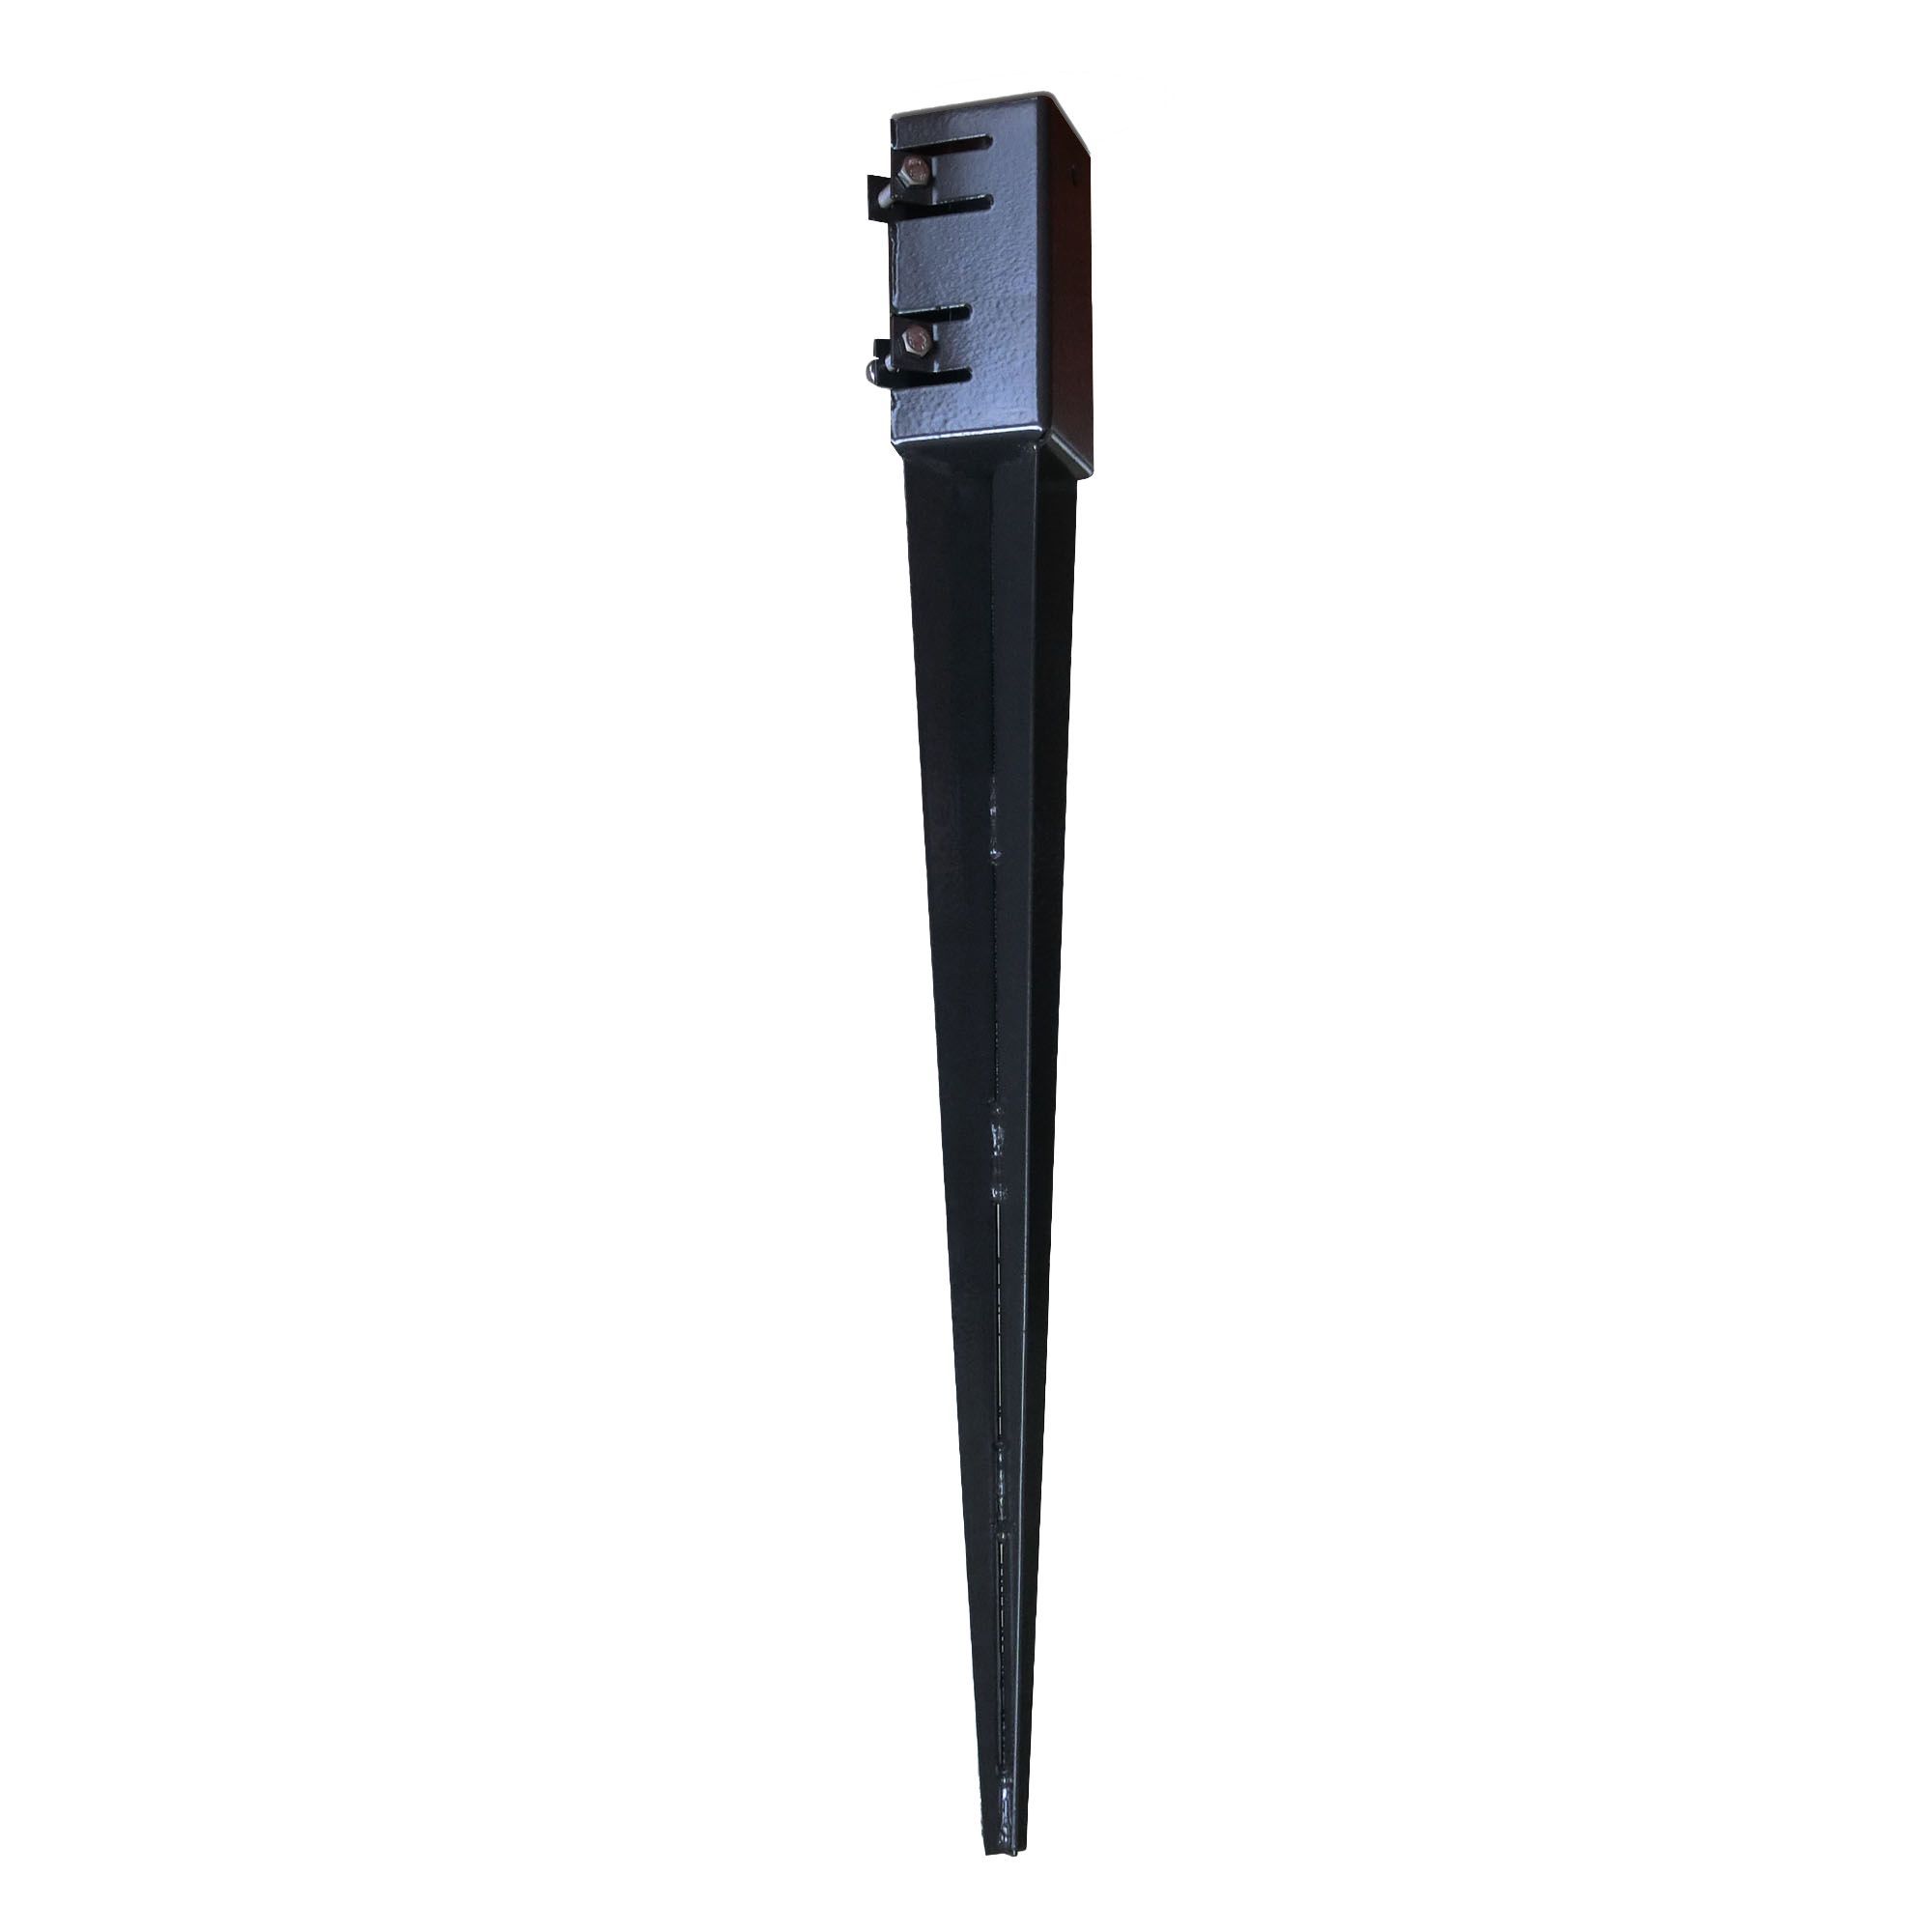 Blooma Soil Spike Steel Post support (L)70mm (W)70mm